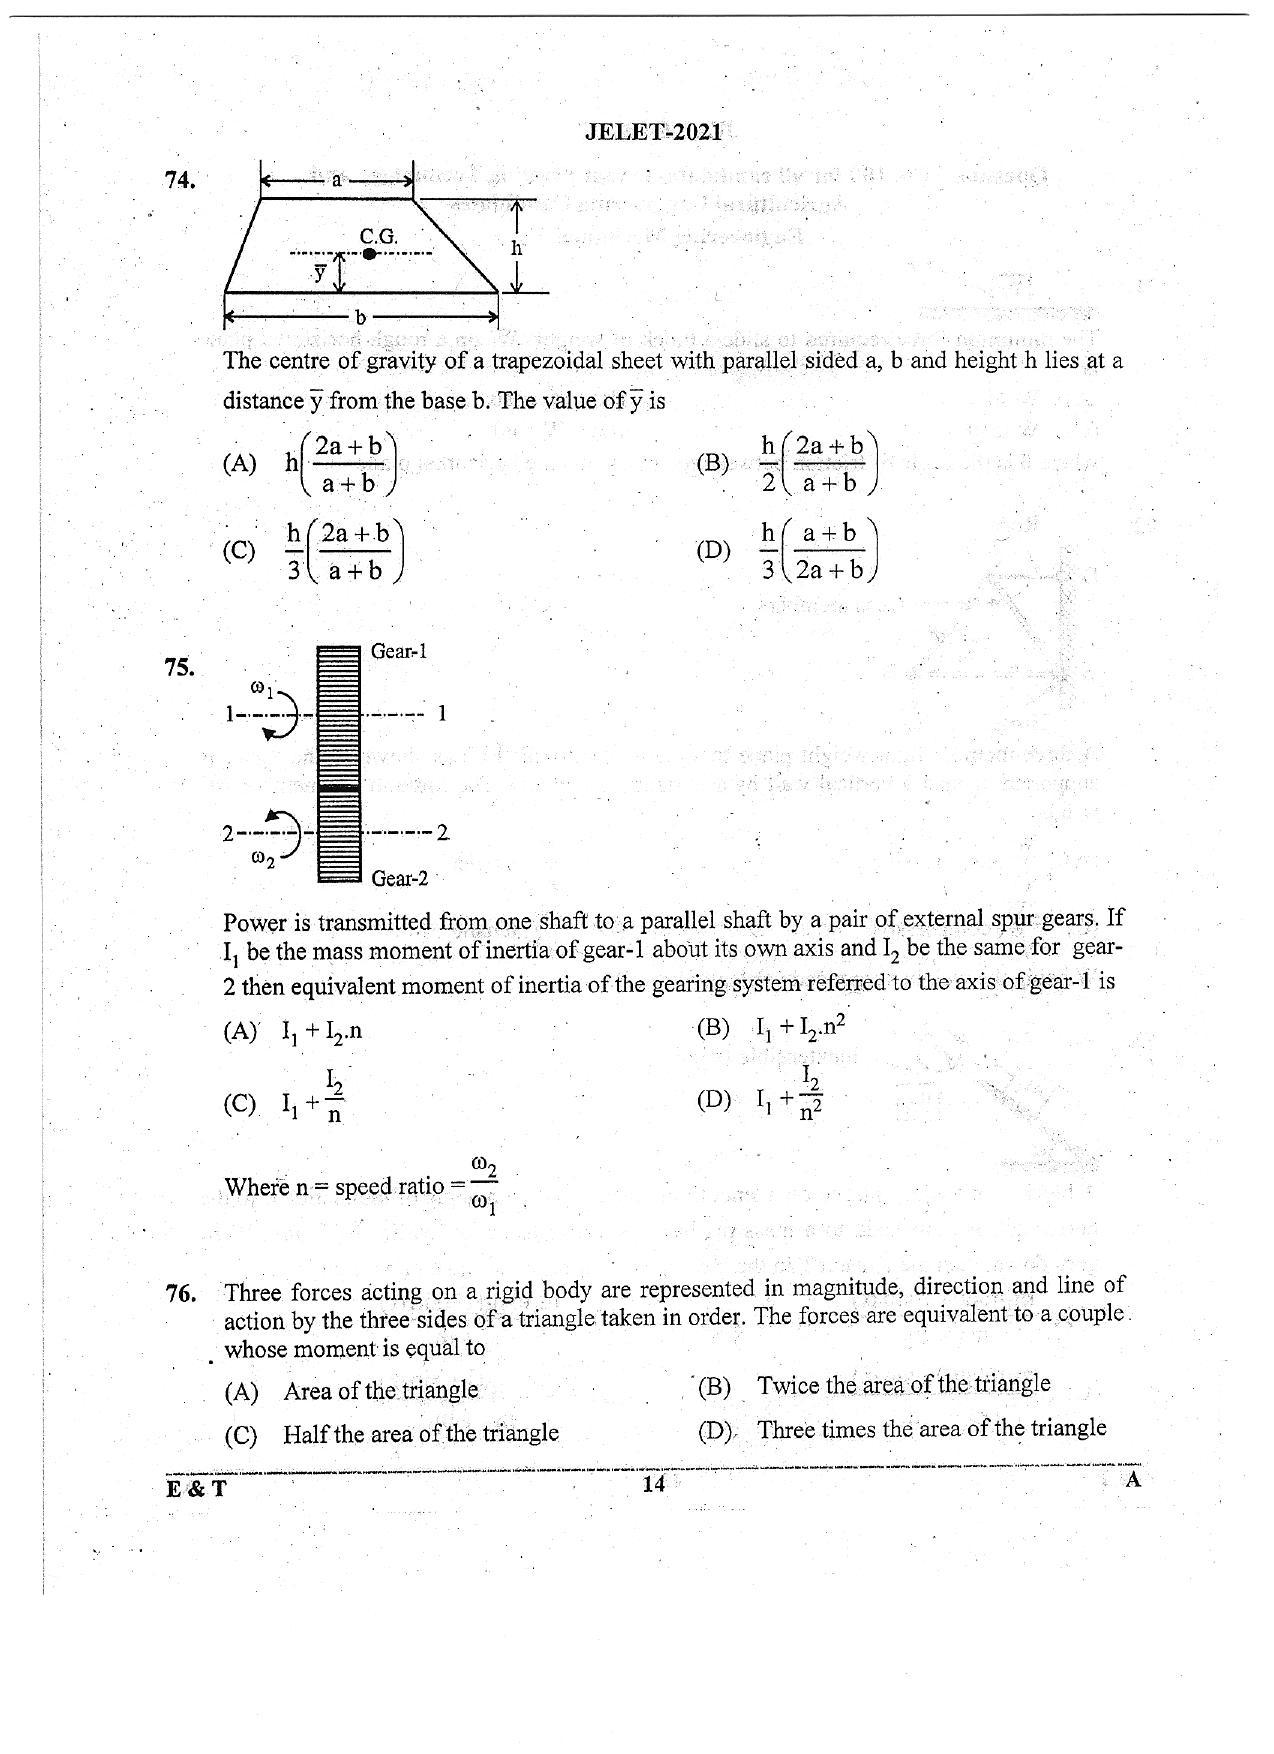 WBJEE  JELET 2021 ( Engg. & Tech.) - Page 14